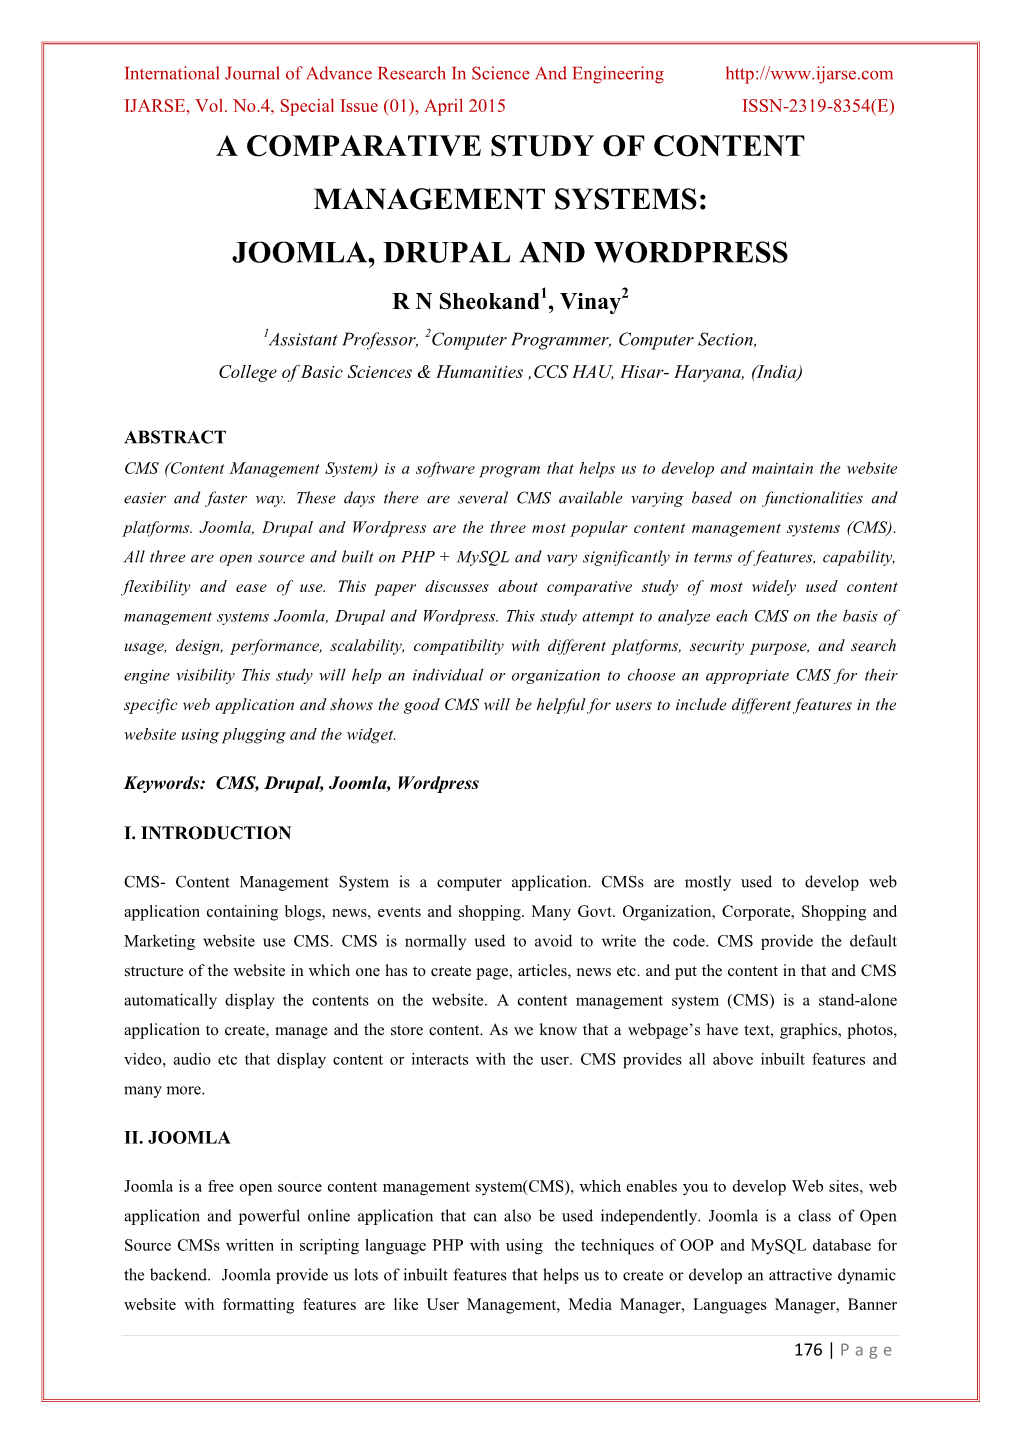 A Comparative Study of Content Management Systems: Joomla